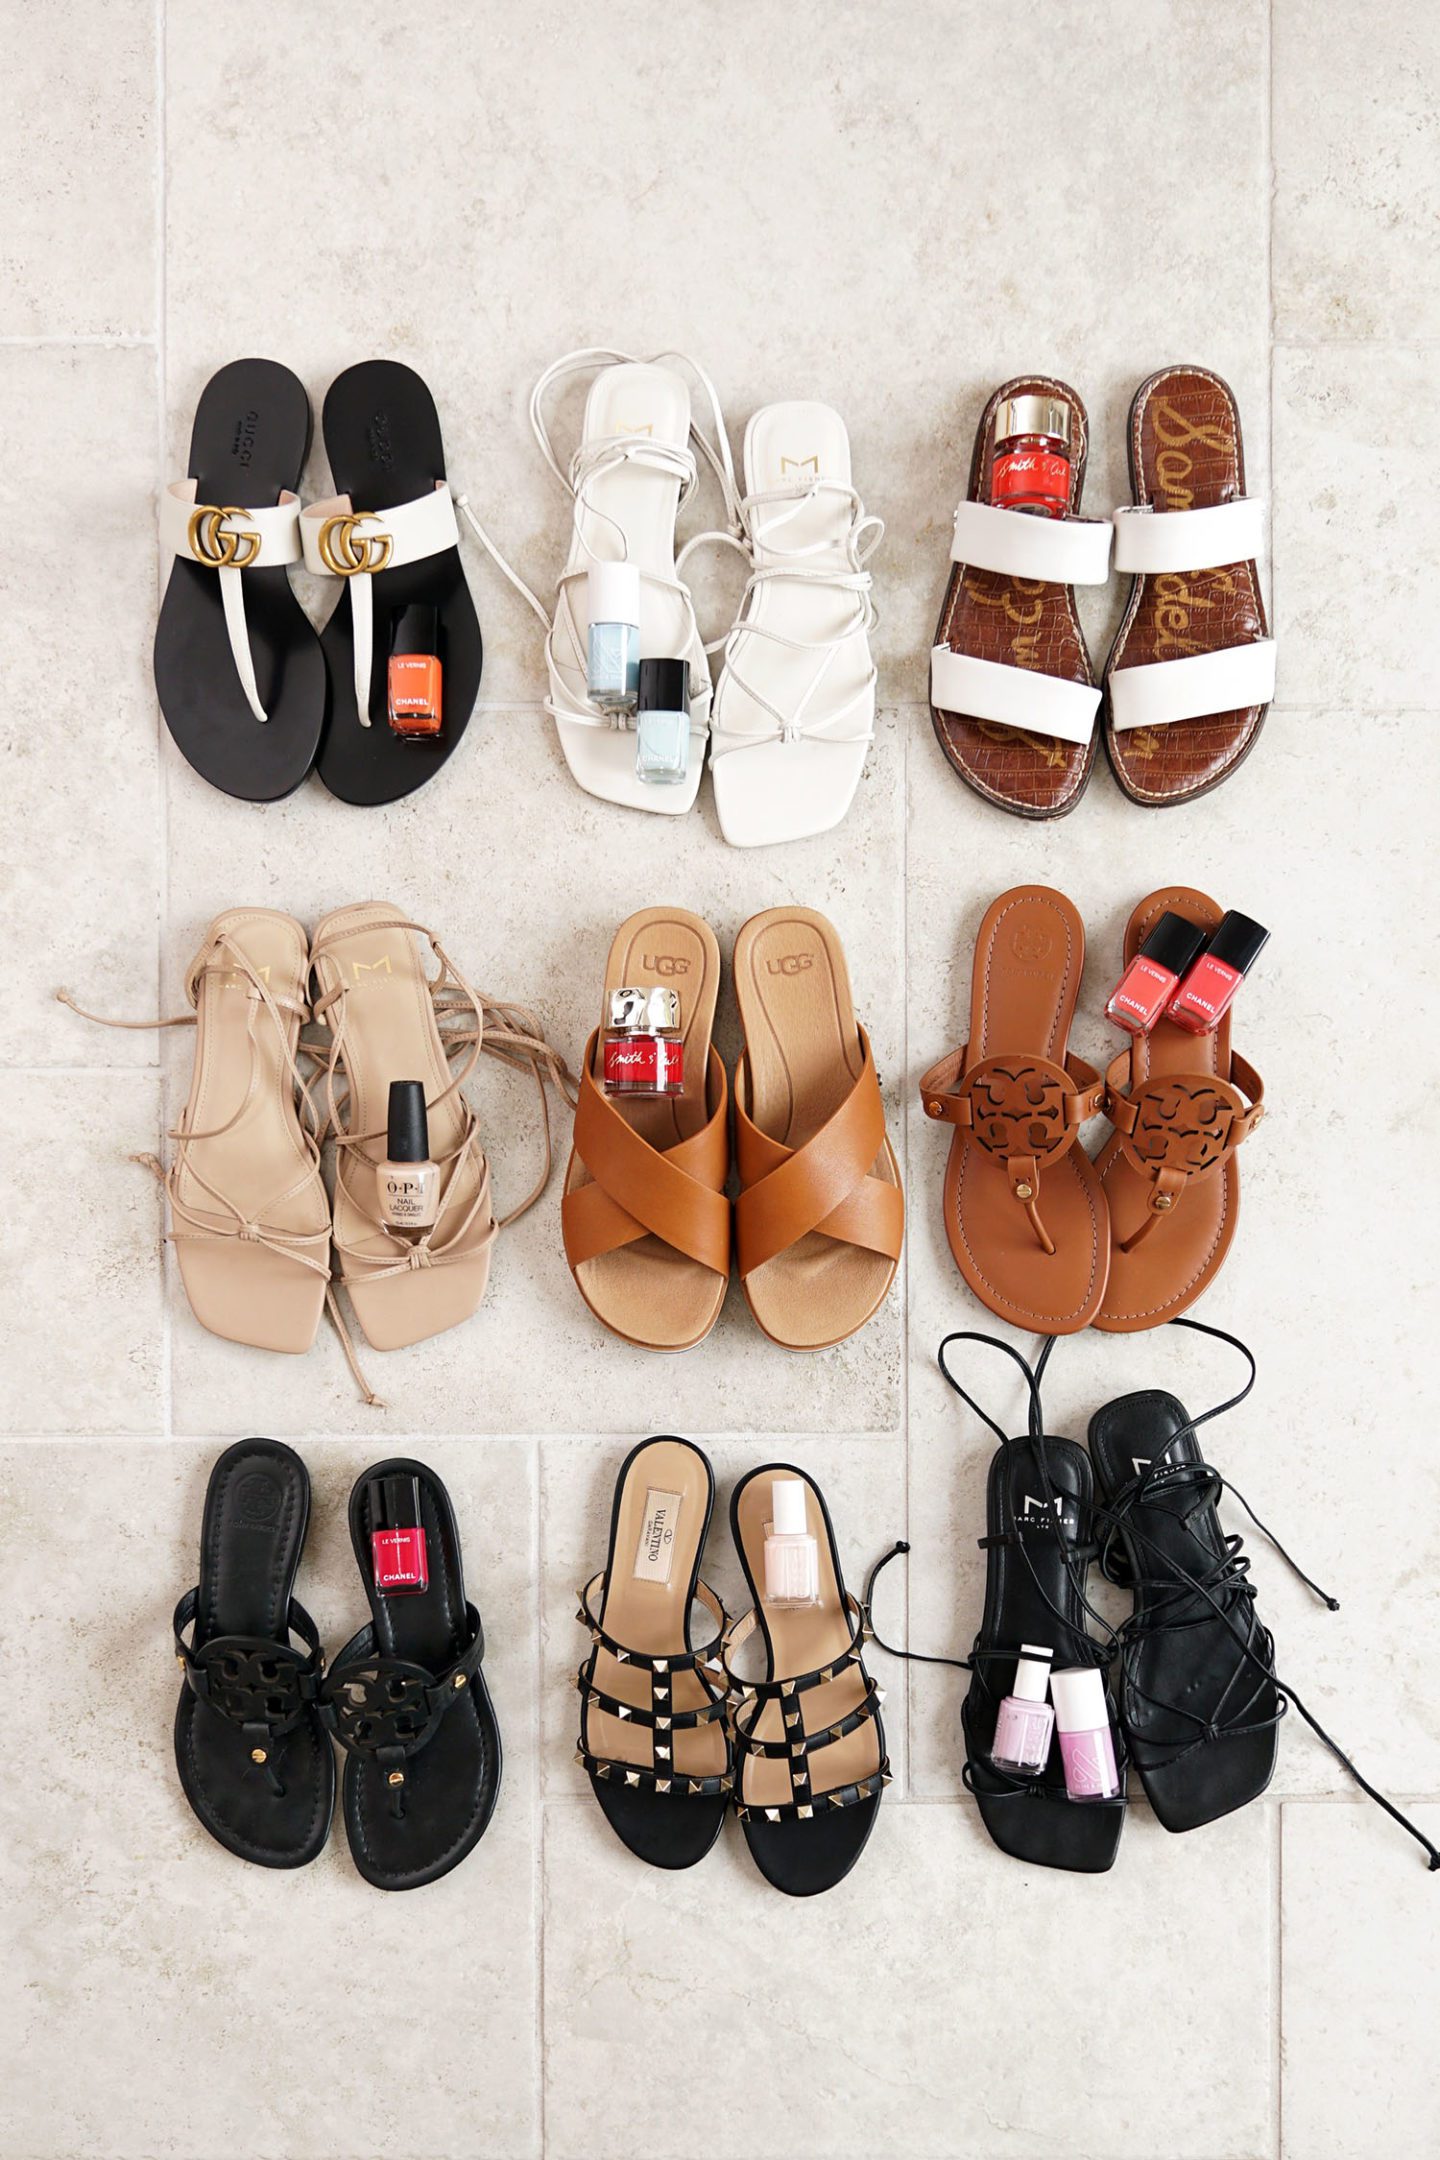 Best Summer Sandals + Nail Polish Colors to Try